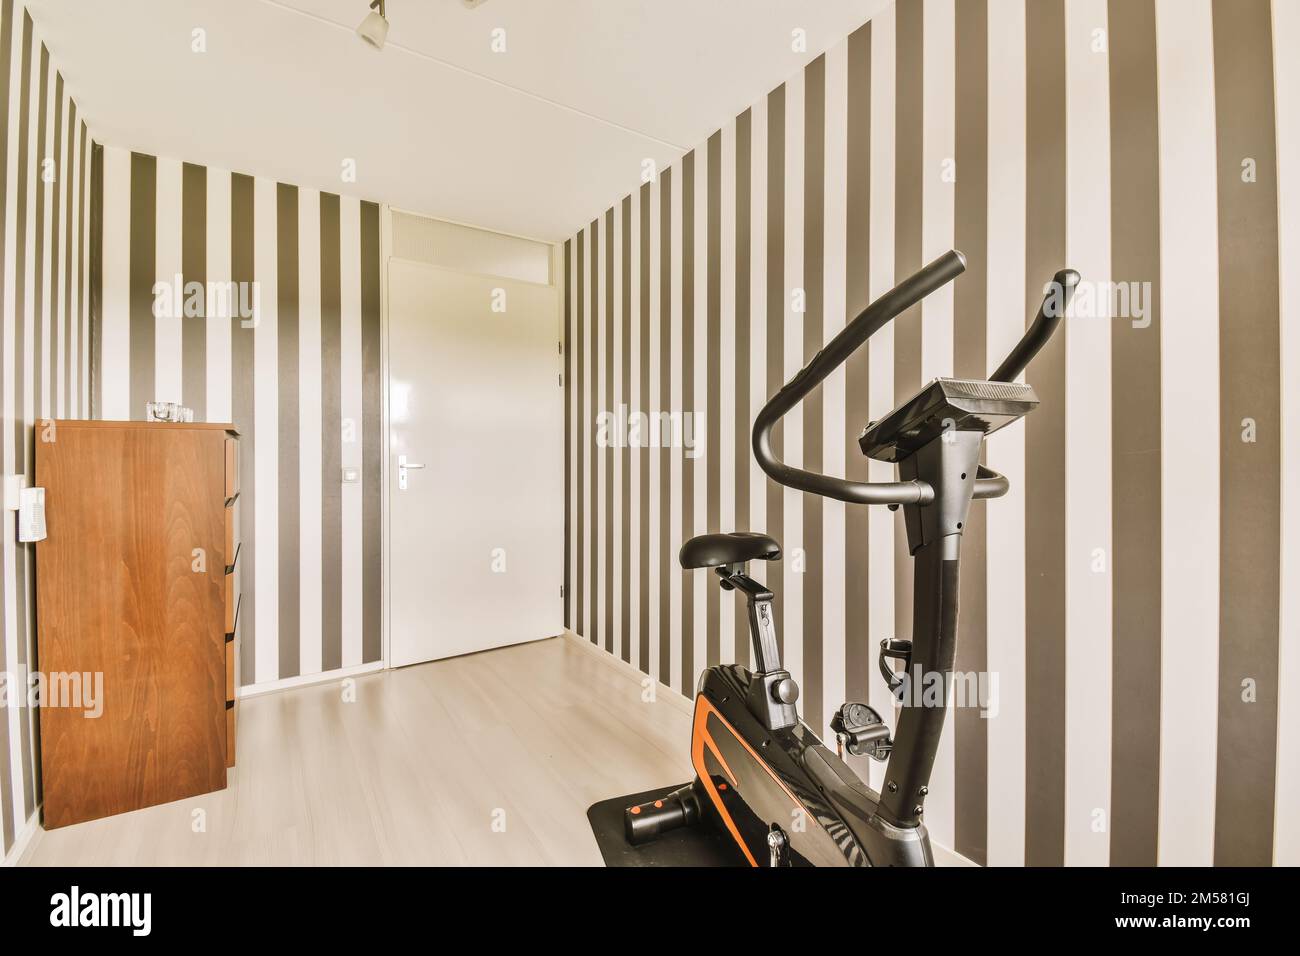 a gym room with an exercise bike on the floor and black and white striped wallpapers in the walls Stock Photo